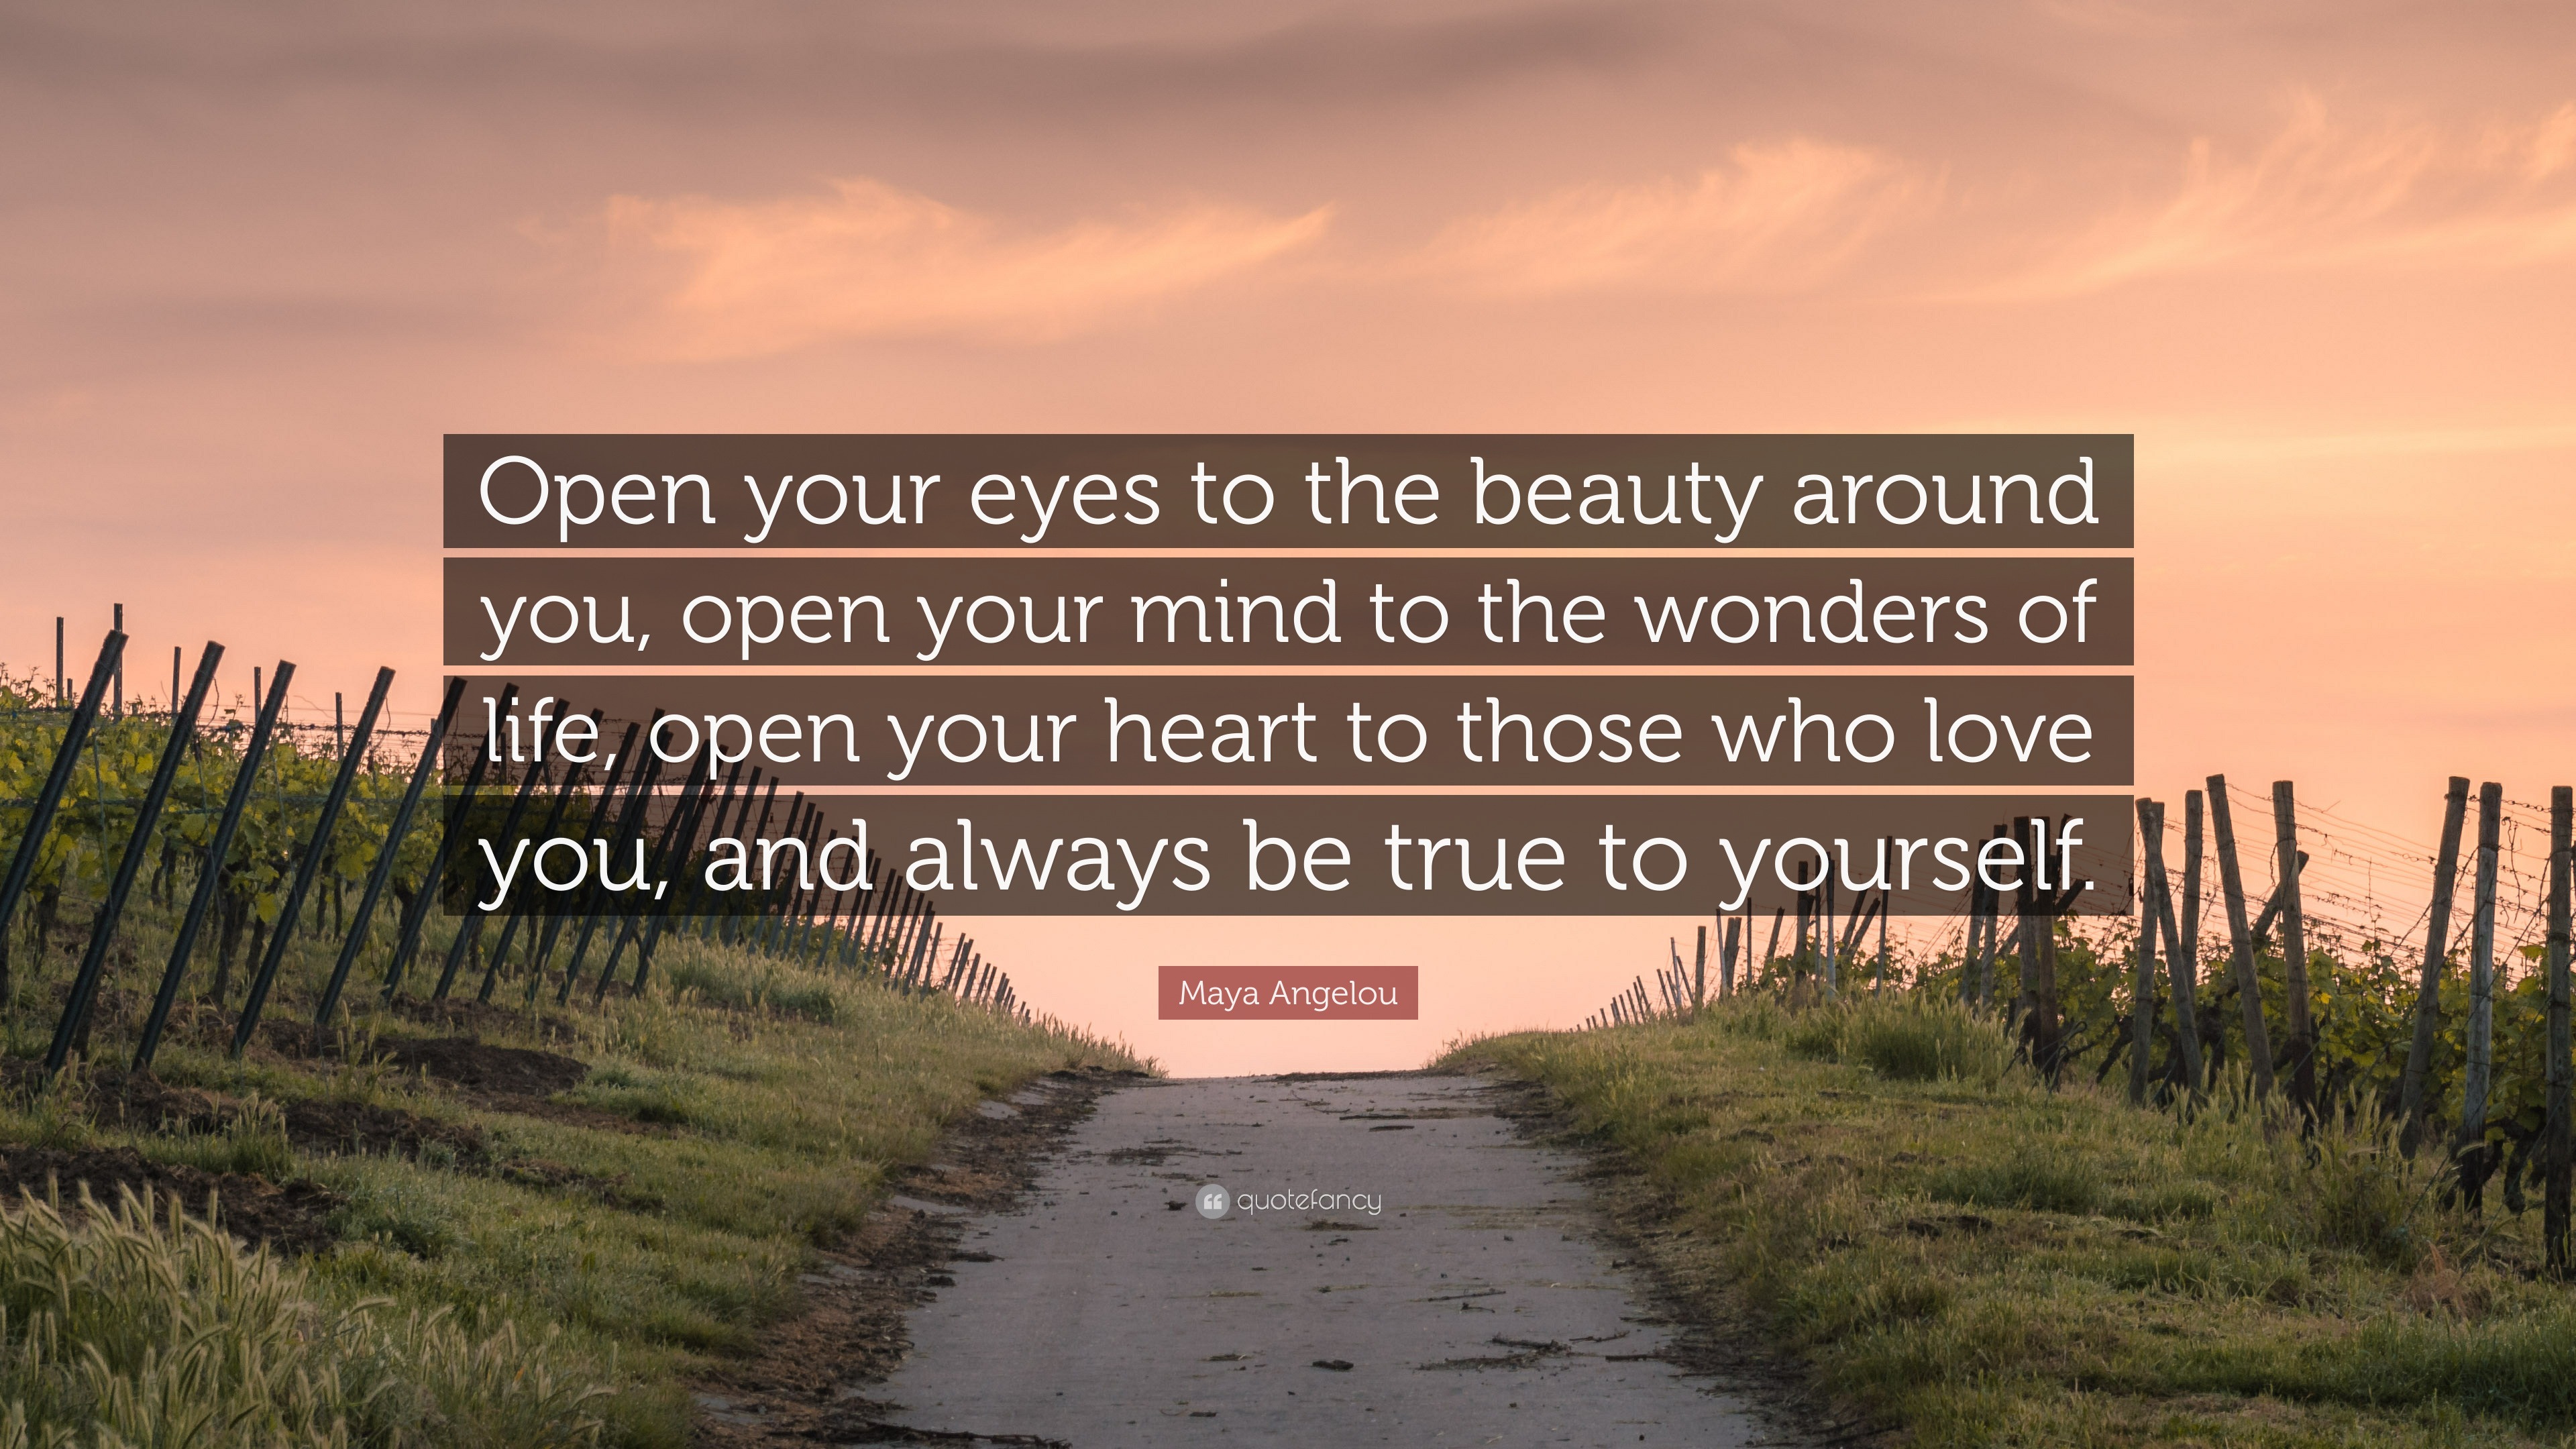 Maya Angelou Quote “Open your eyes to the beauty around you open your